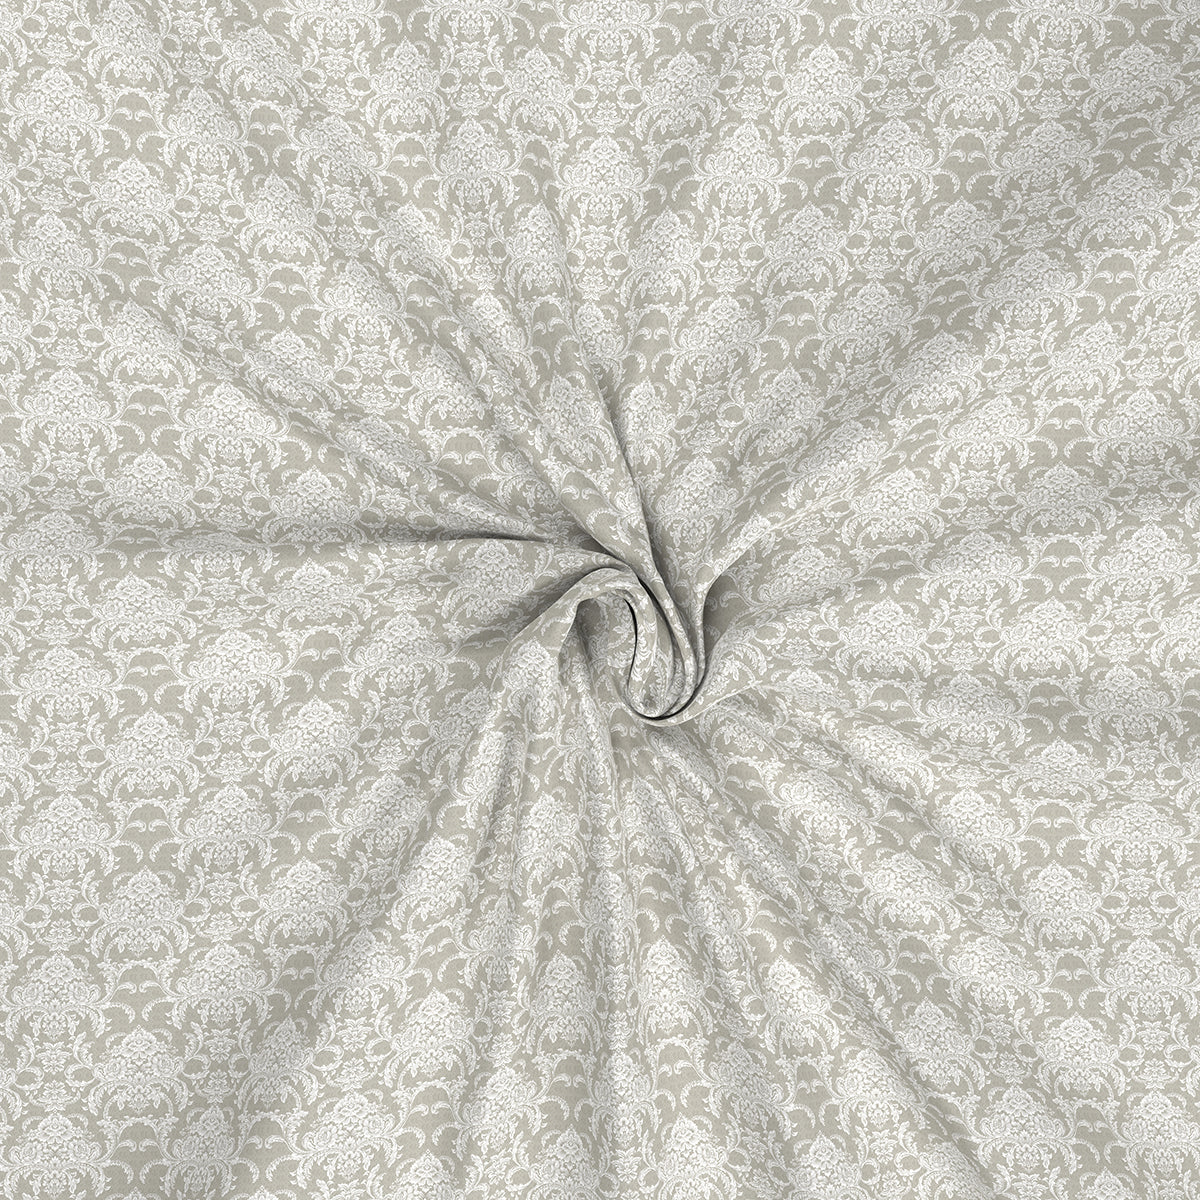 Hermosa Exotic Bouquet Damask Floral Neutral Bed Sheet with Pillow Case